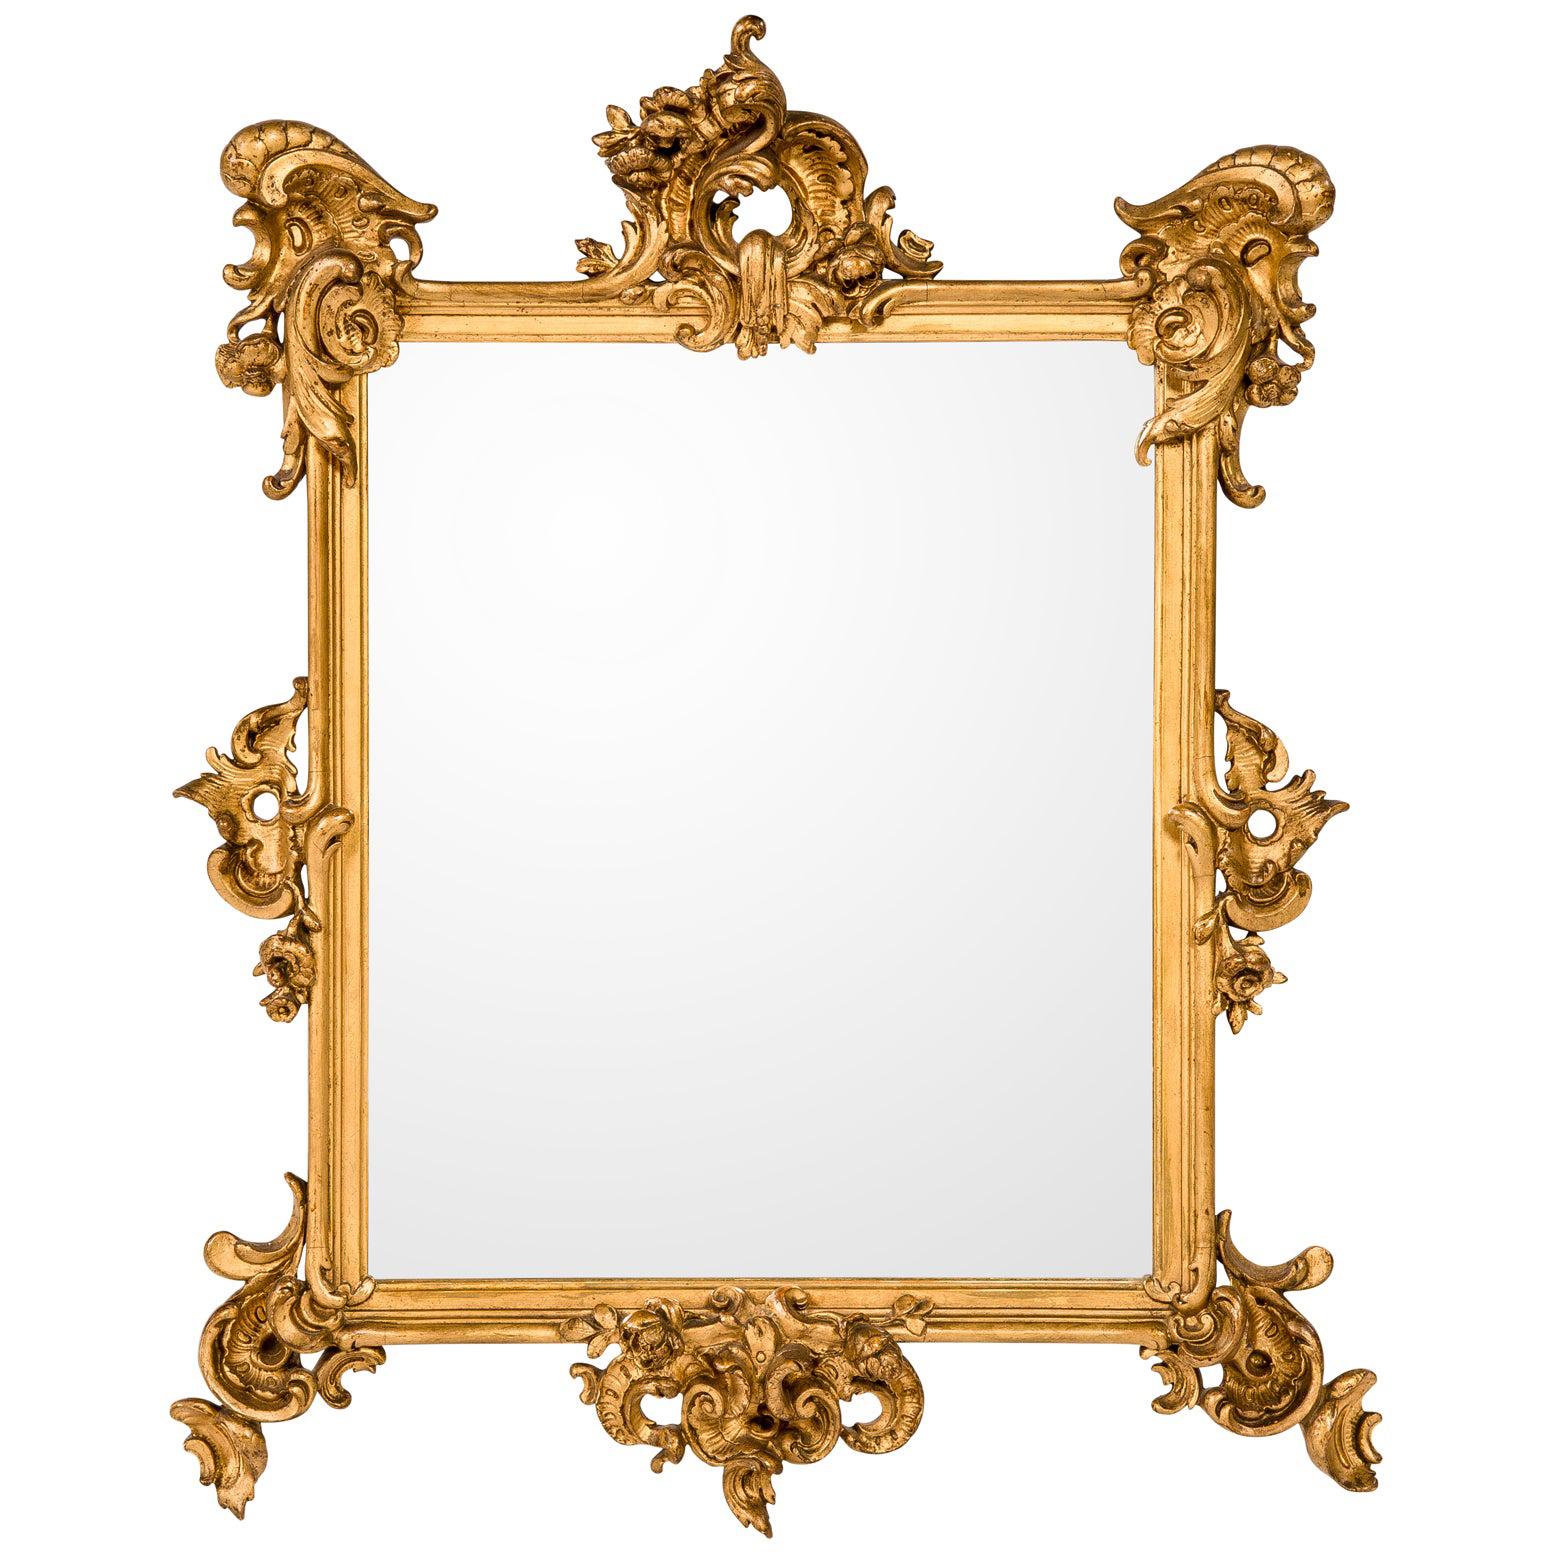 Antique 19th Century French Baroque Gold Leaf Gilt Rectangular Mirror For Sale